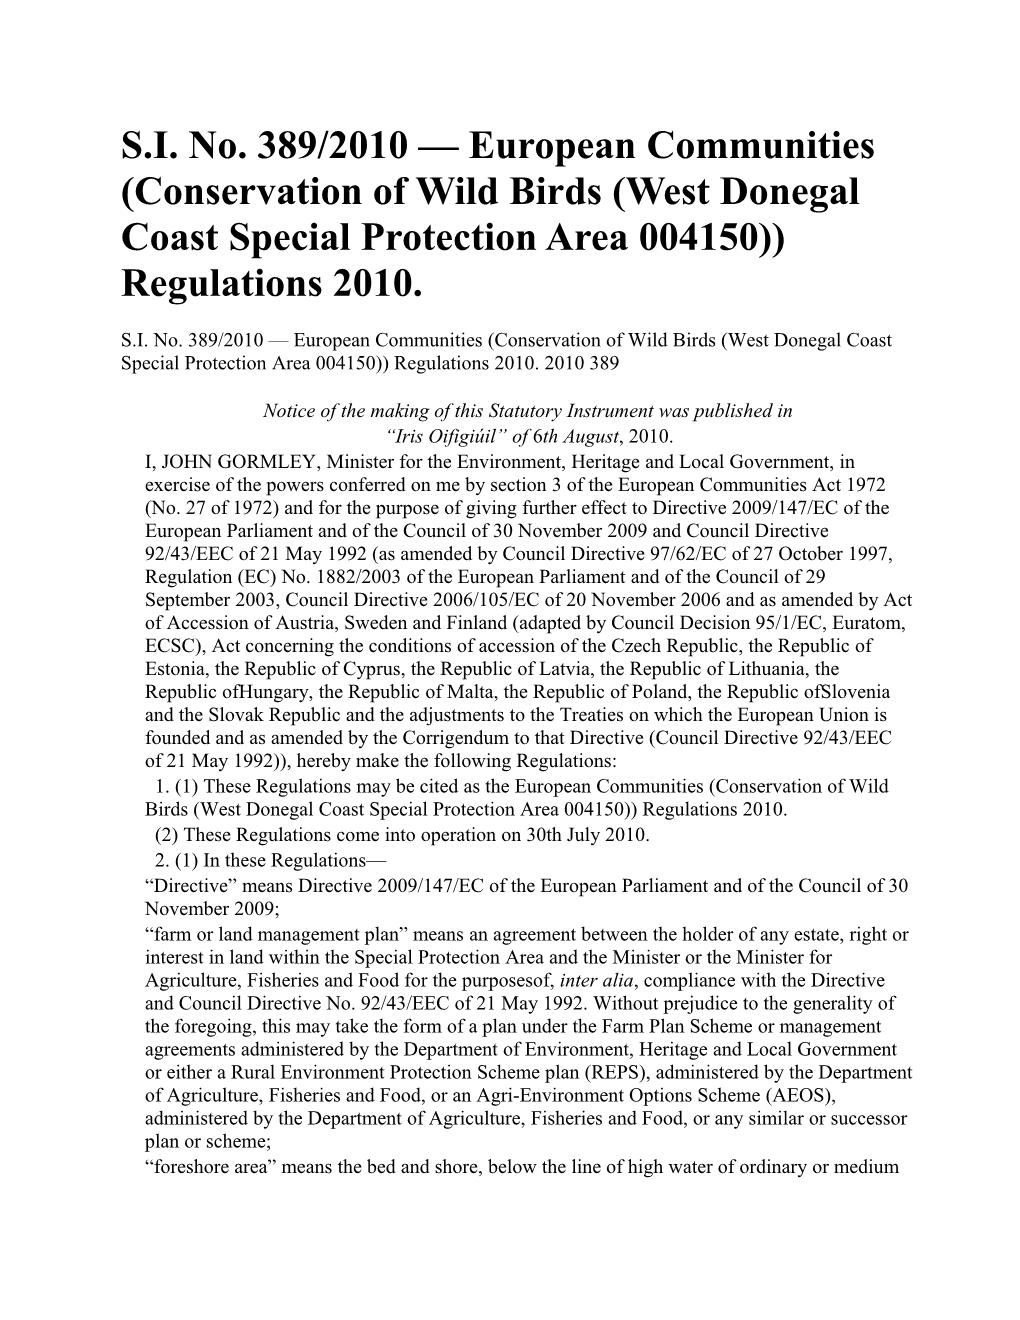 S.I. No. 389/2010 European Communities (Conservation of Wild Birds (West Donegal Coast